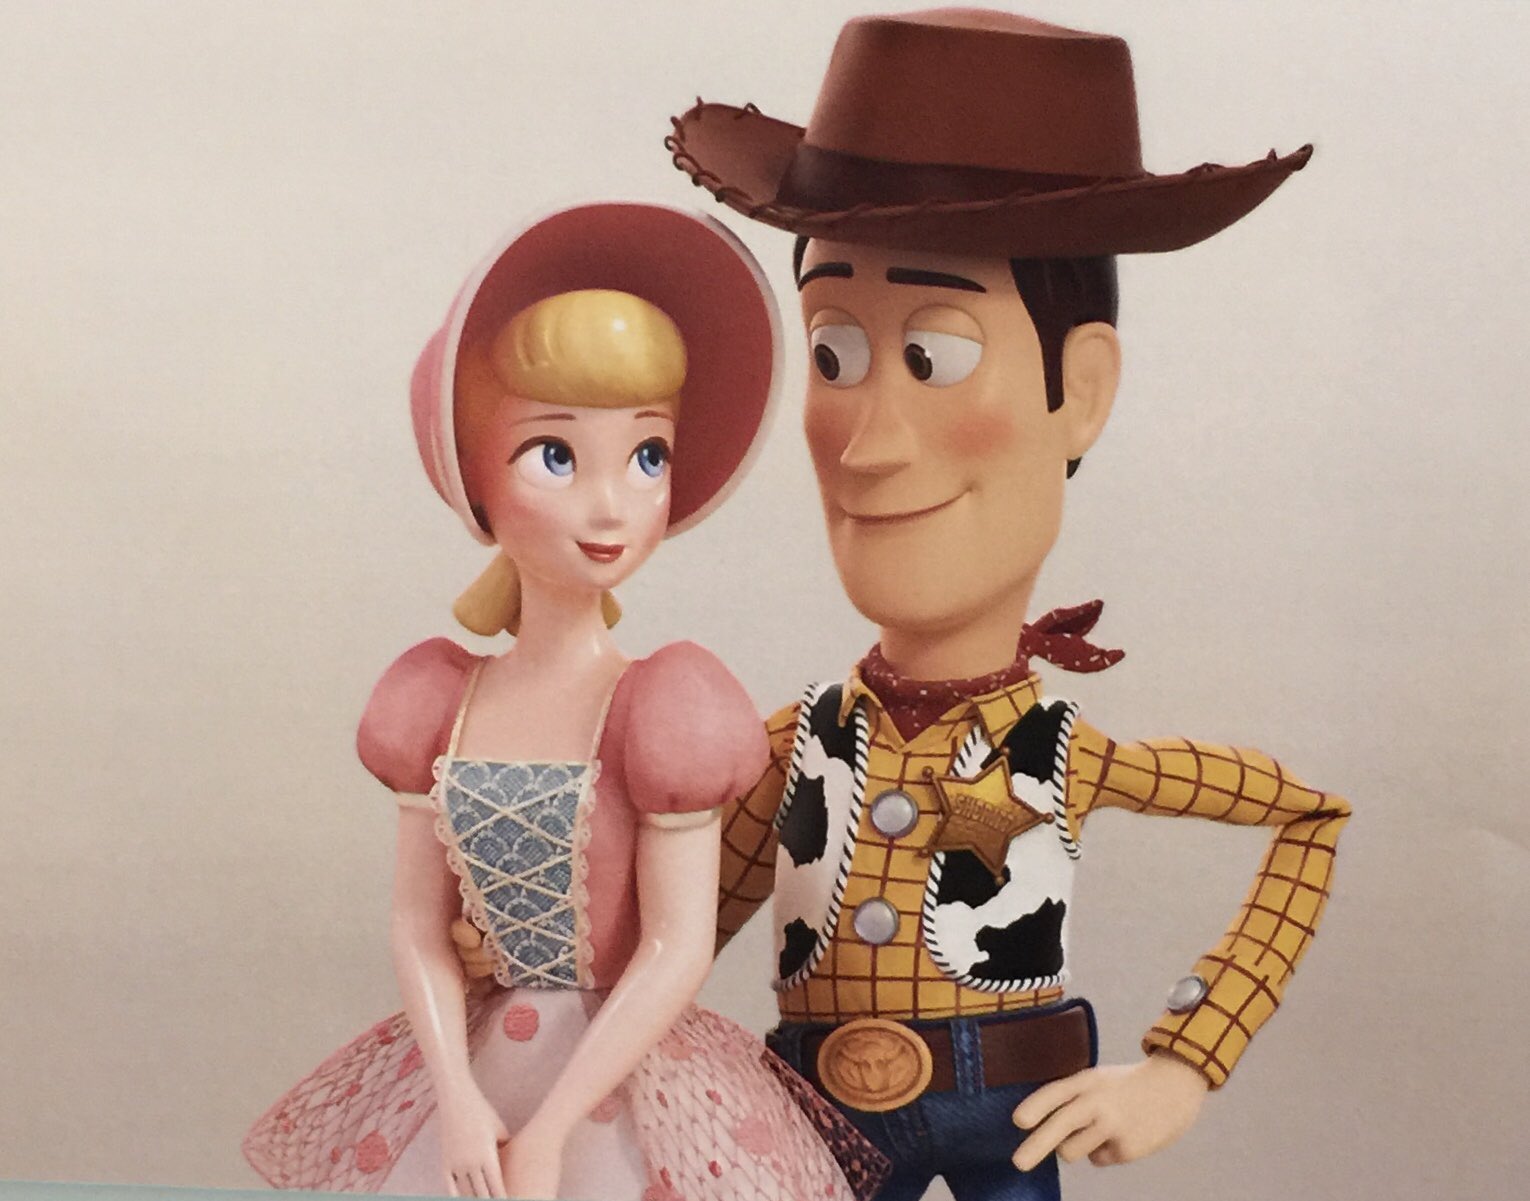 Toy Story 4 Continues To Be The Number One Movie In The ...